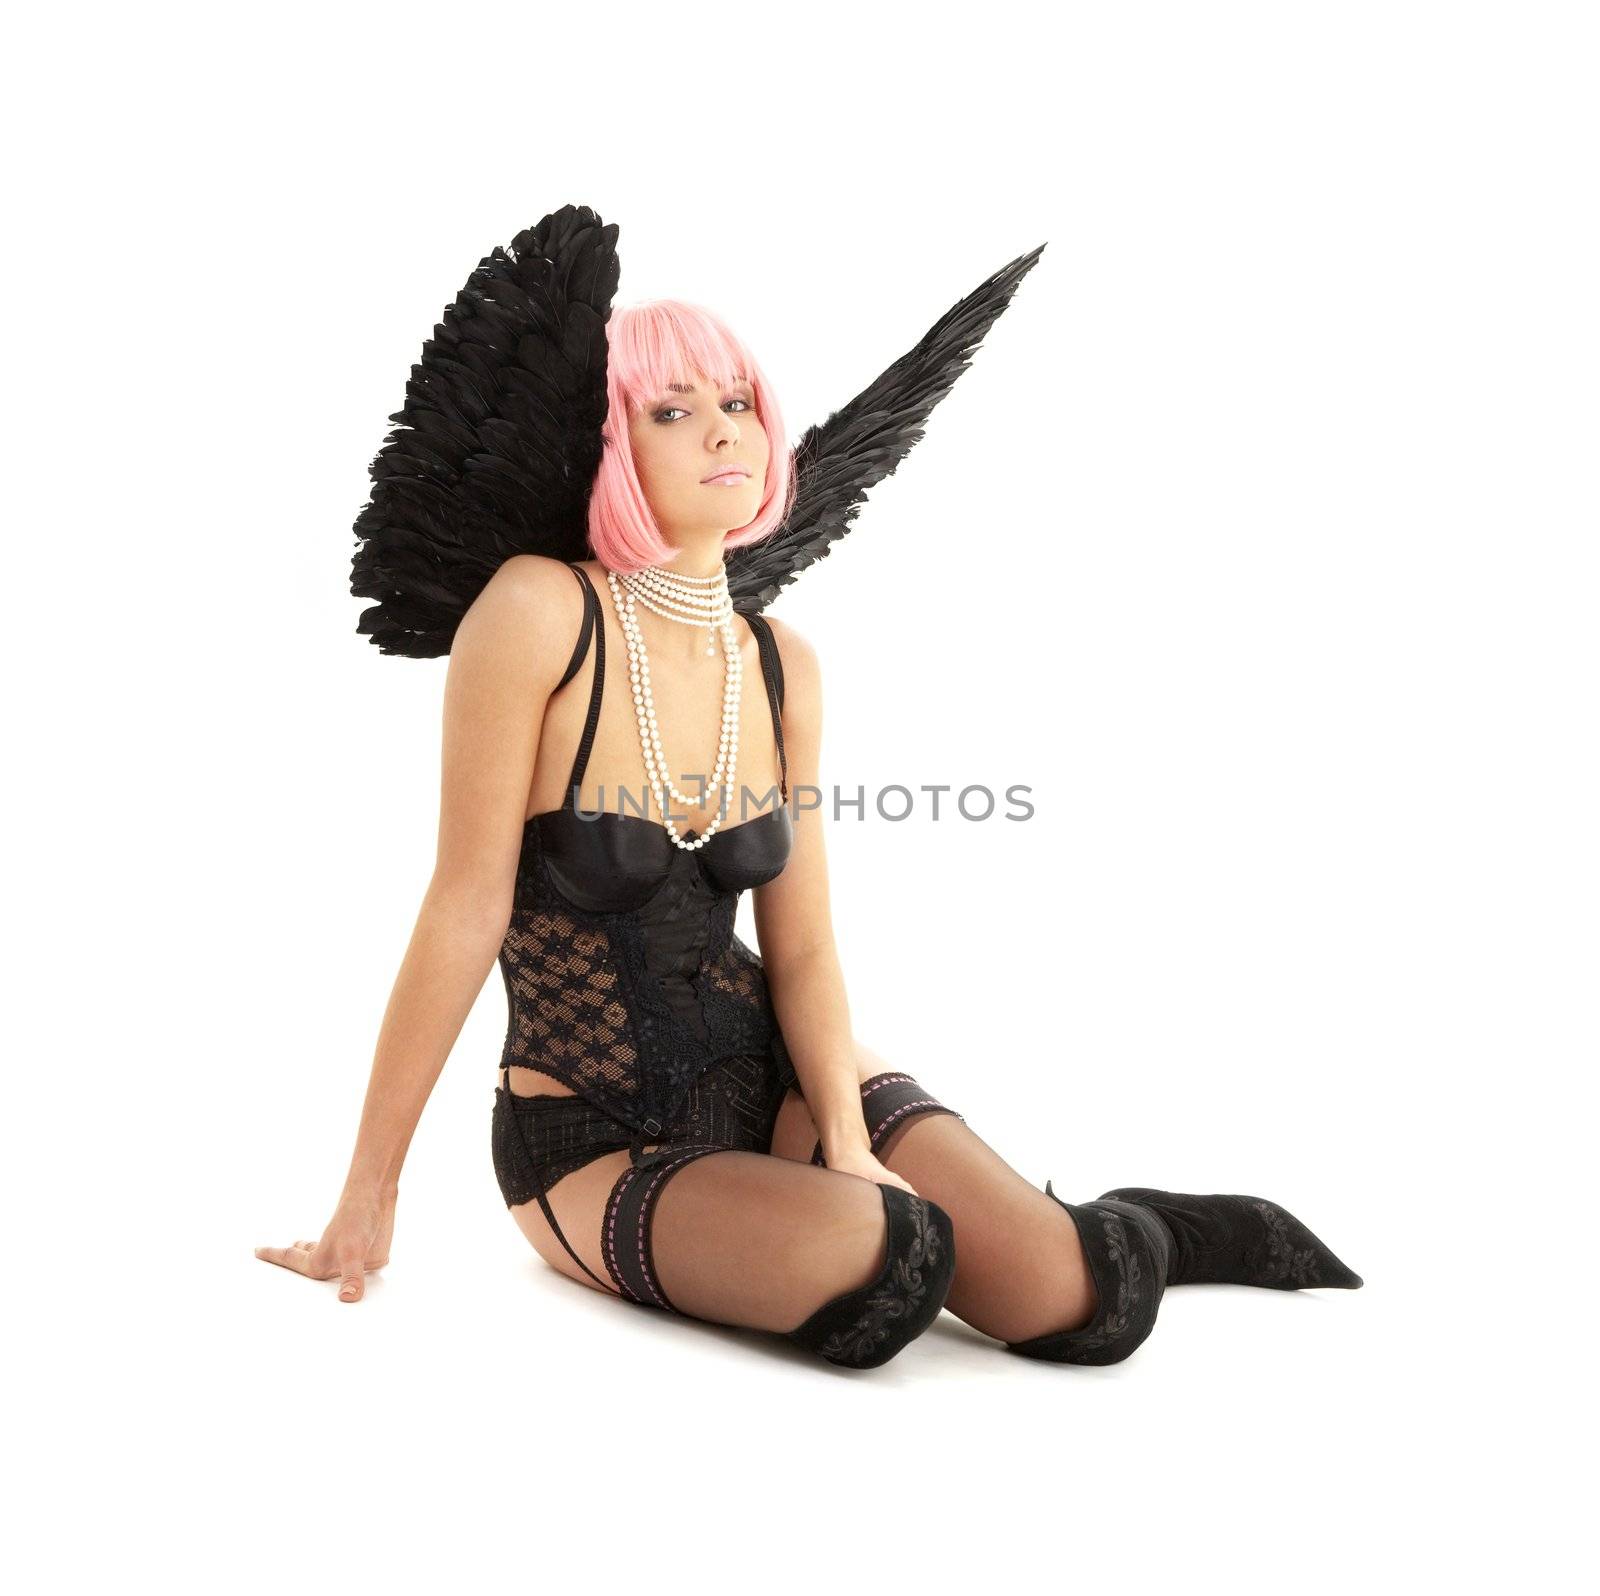 black lingerie angel with pink hair over white